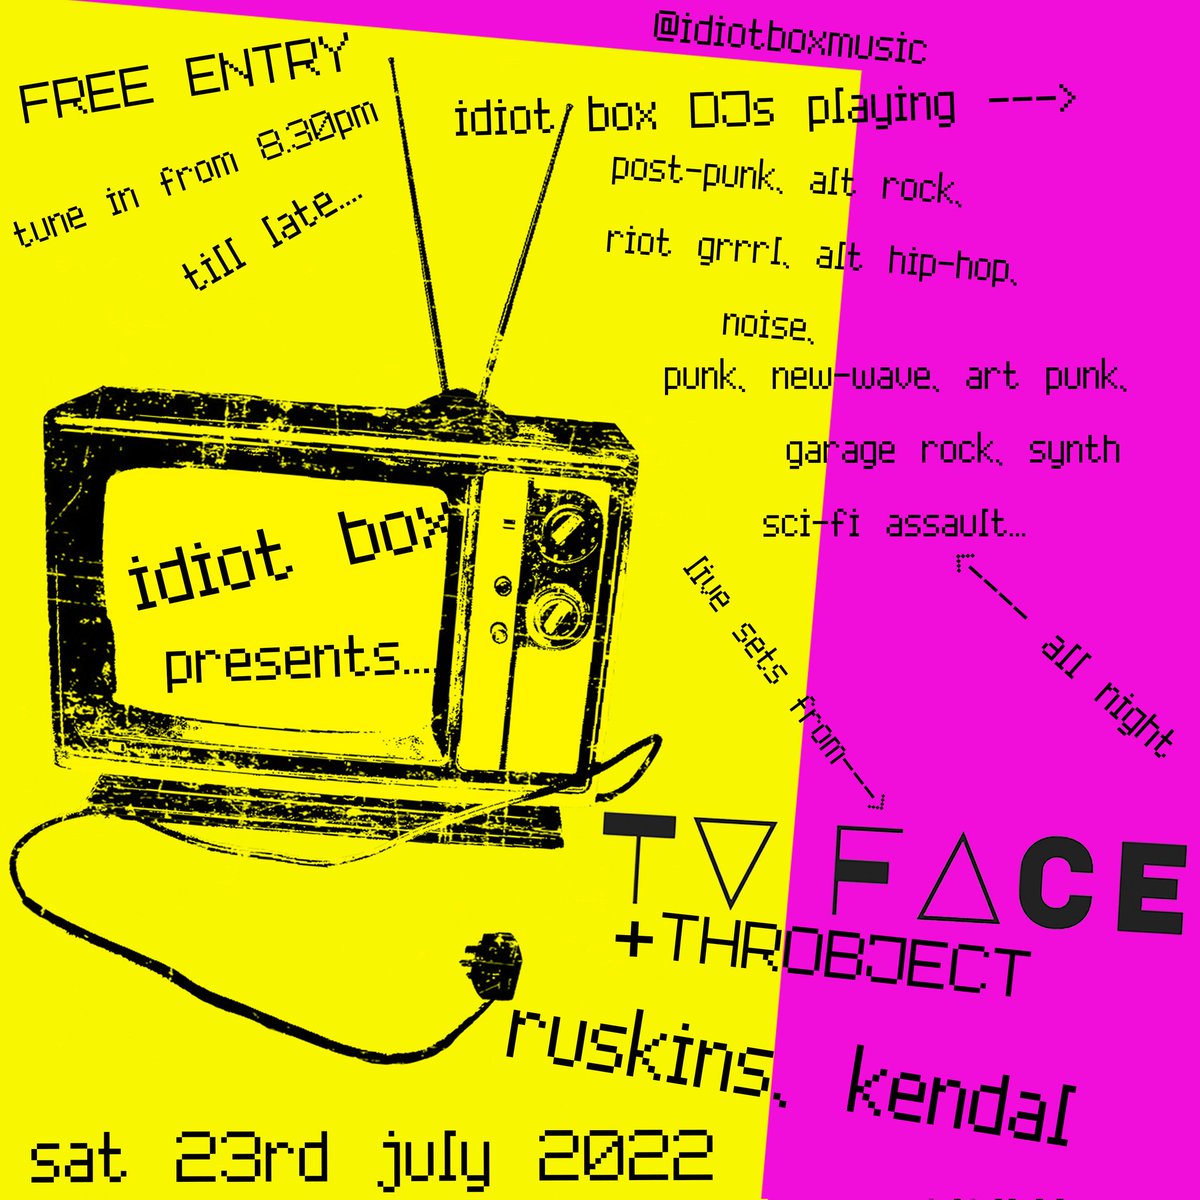 Our next outing is in #kendal Ruskins Bar with support from @throbject and @idiotboxmusic DJs spinning alternative tracks all night. FREE ENTRY! 📺😜 #kendalmusic #cumbria #gigs #DIYmusic #livemusic #artpunk #alternative #nowave #garagerock #riotgrrl #postpunk #scifisynth